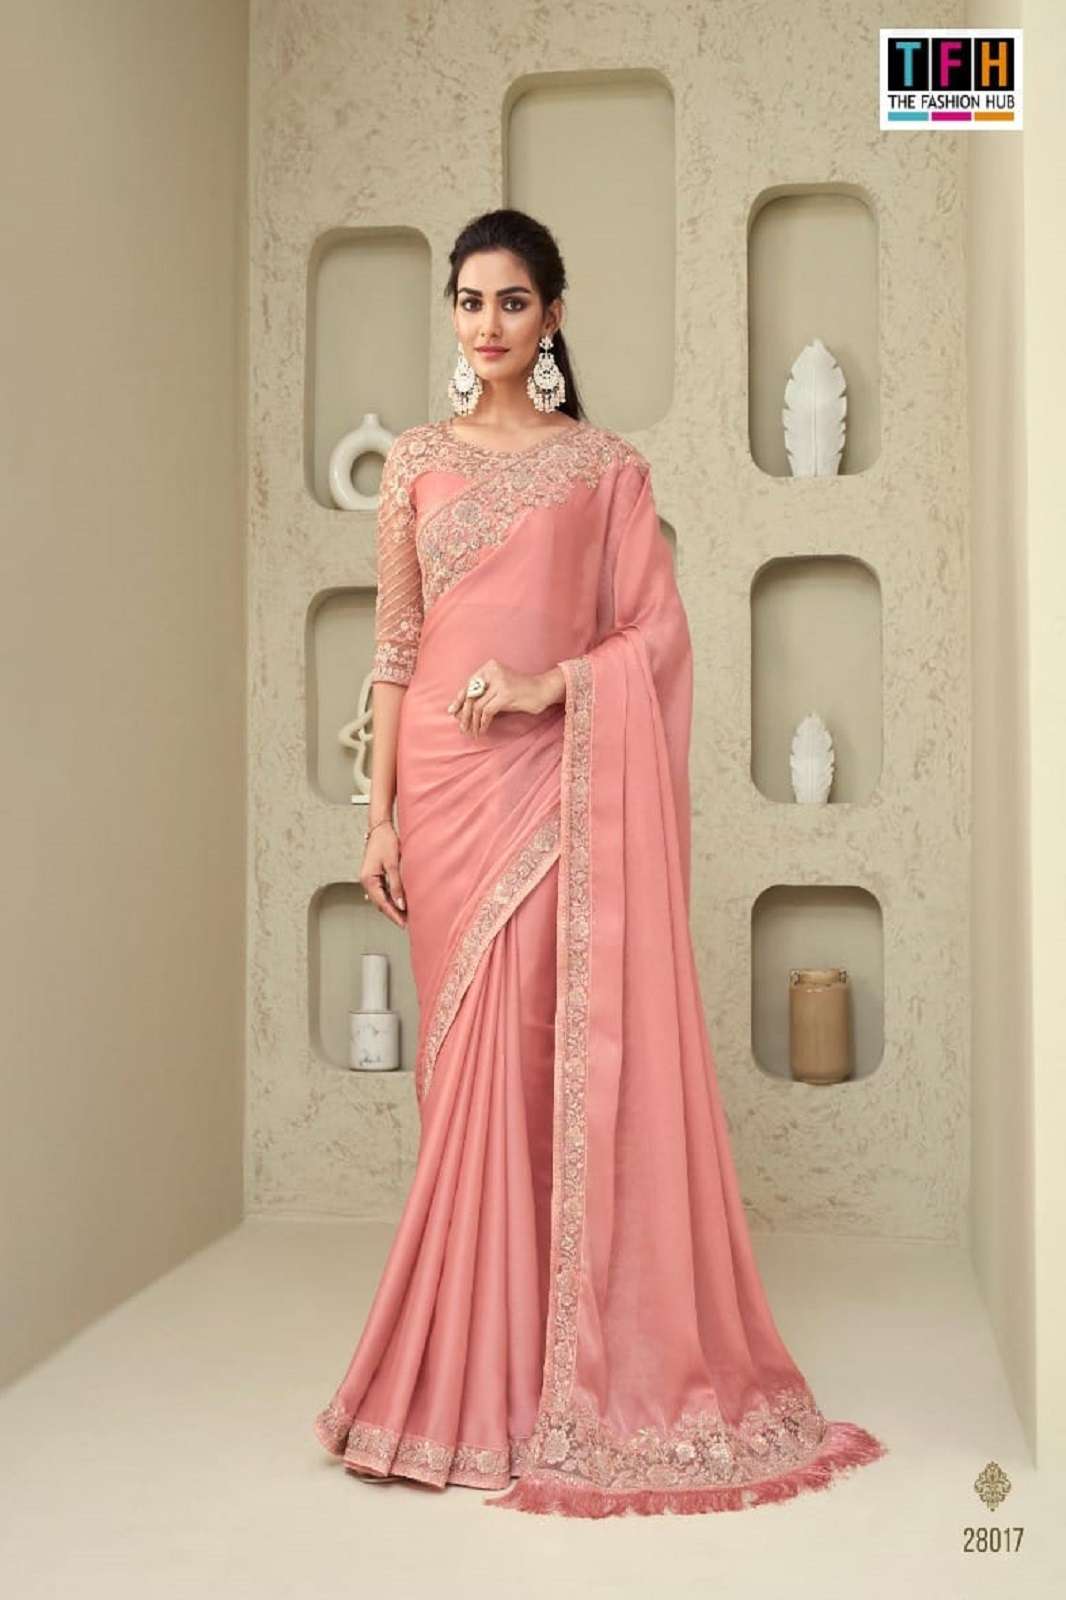 Tfh Silver Screen -18th Edition Stylish Woman Partywear, Bridal Saree Collection